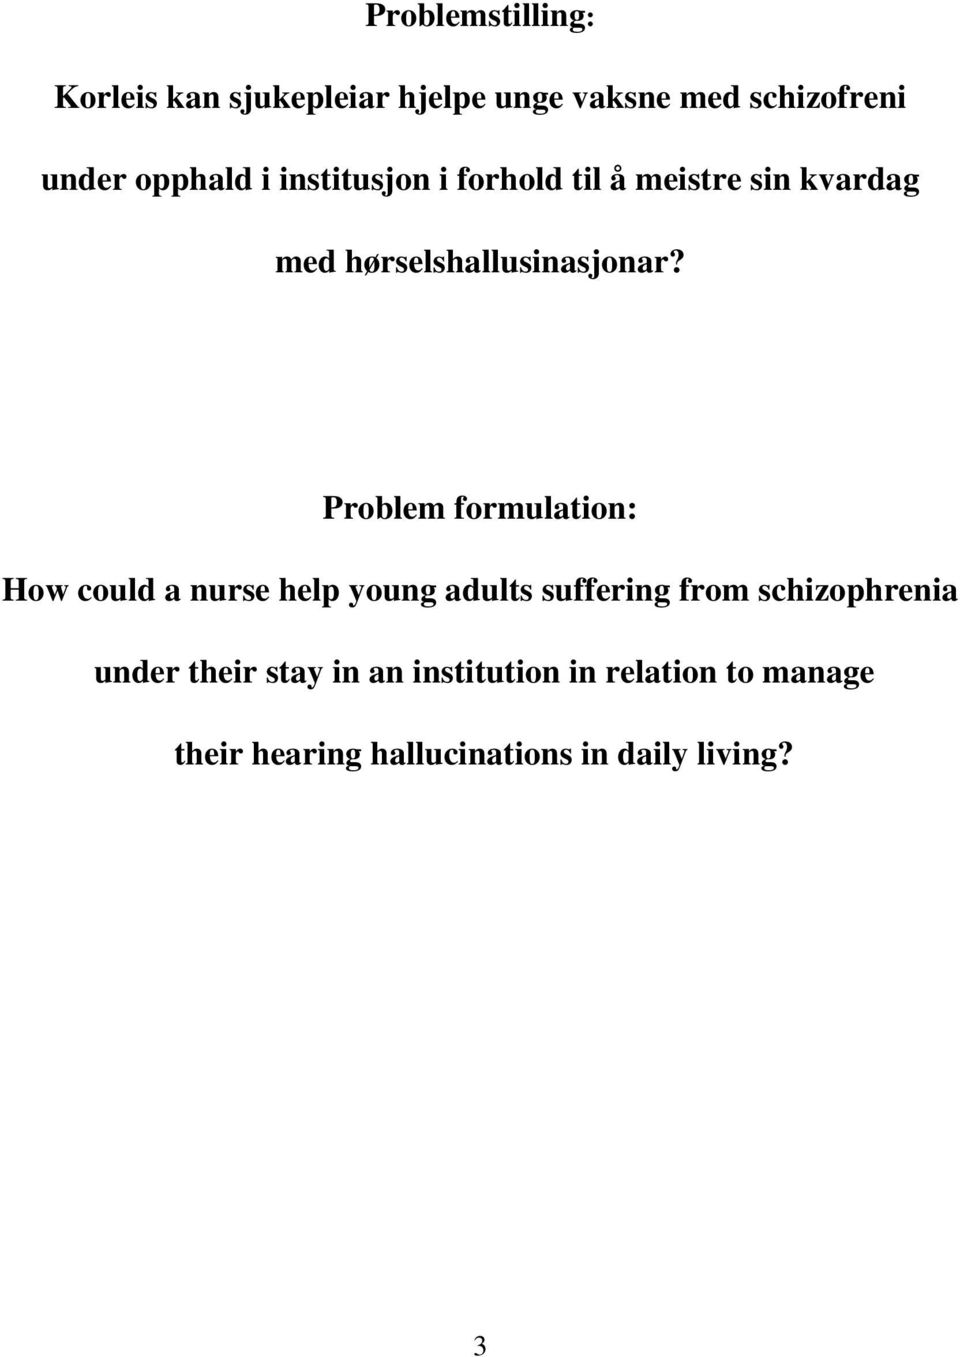 Problem formulation: How could a nurse help young adults suffering from schizophrenia